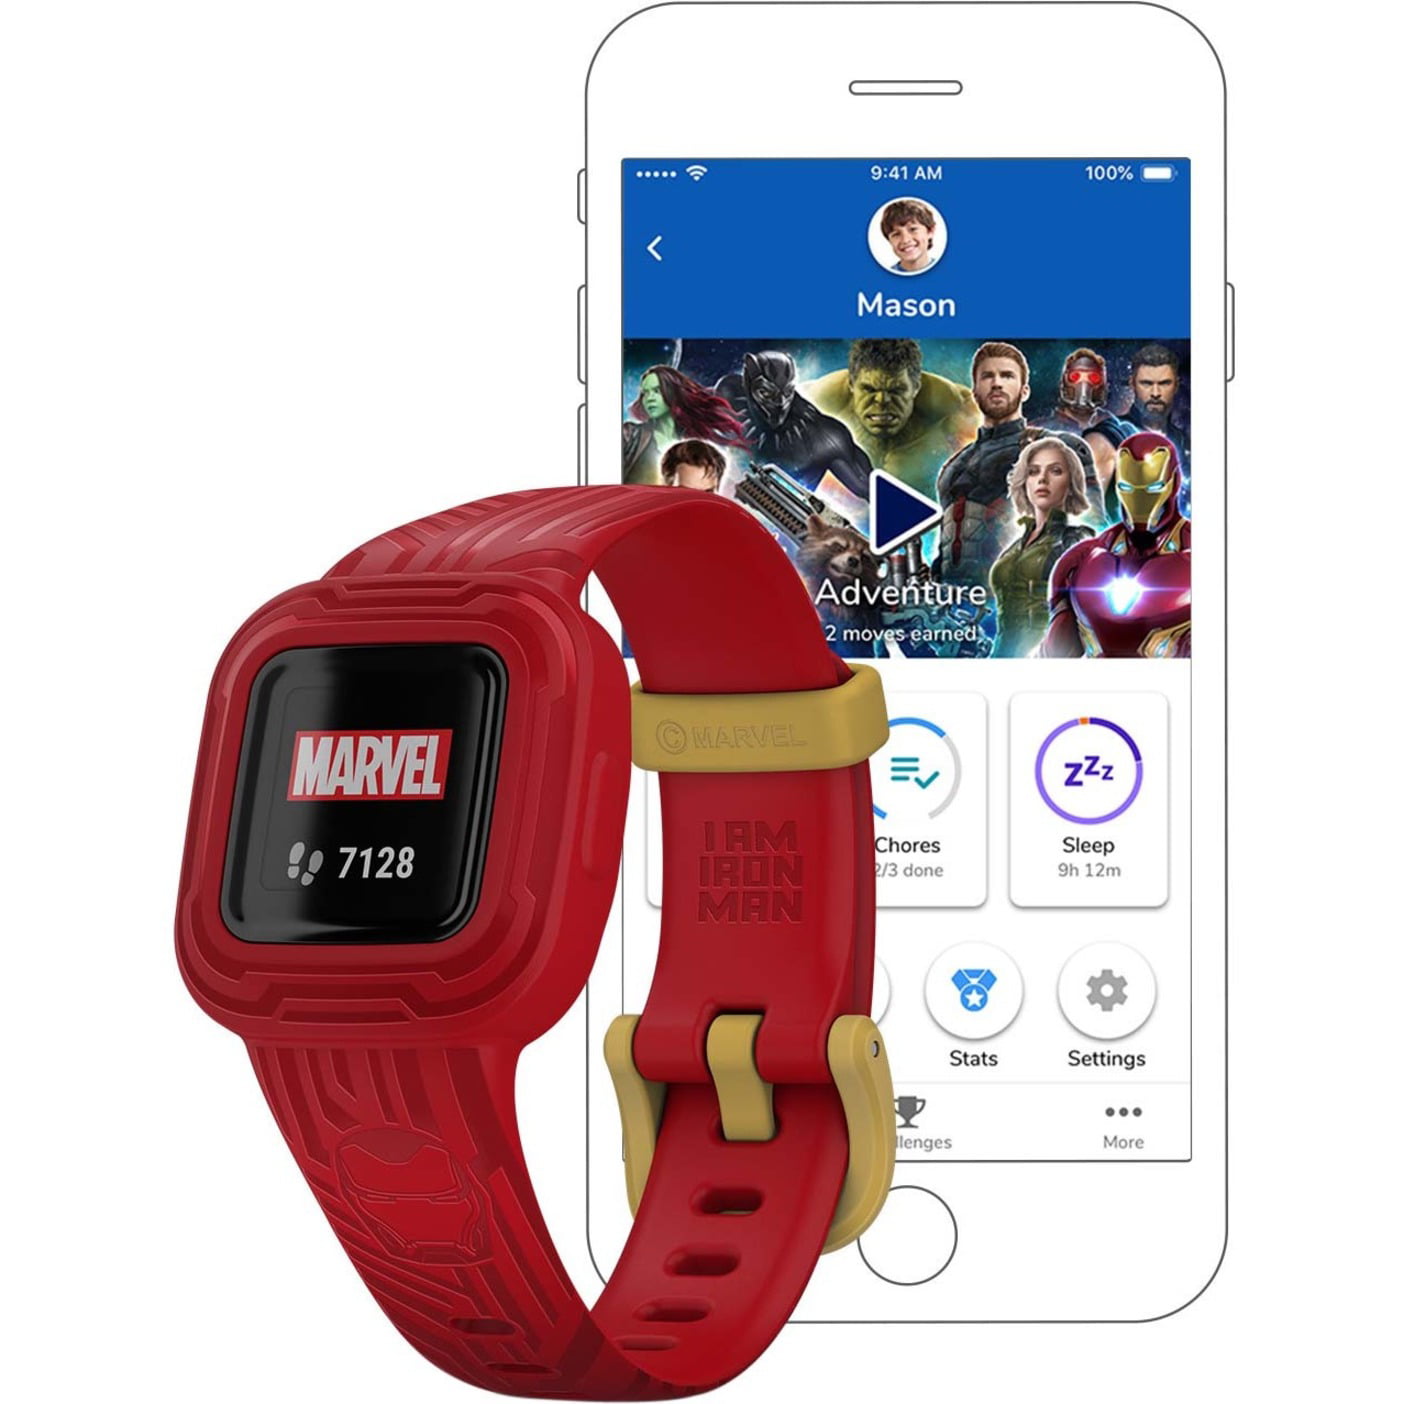 Vivofit jr. 3 - Marvel Iron Man - Activity Tracker with Band - Silicone - Red - Wrist Size: 5.12 in - 6.89 in - Bluetooth - 0.88 oz - Walmart.com